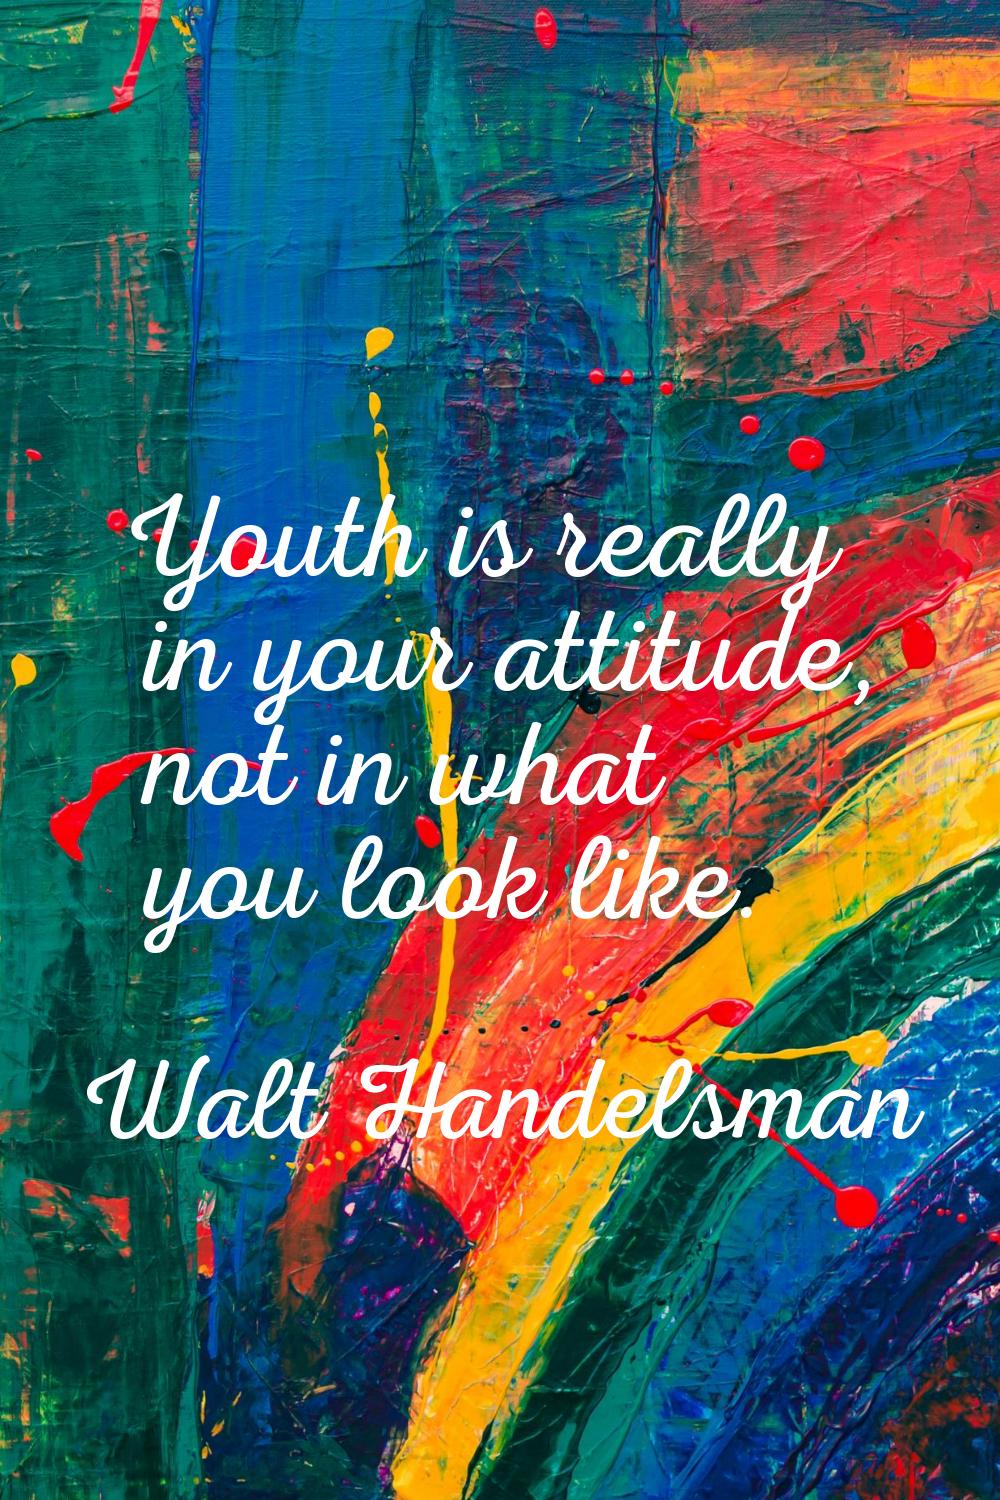 Youth is really in your attitude, not in what you look like.